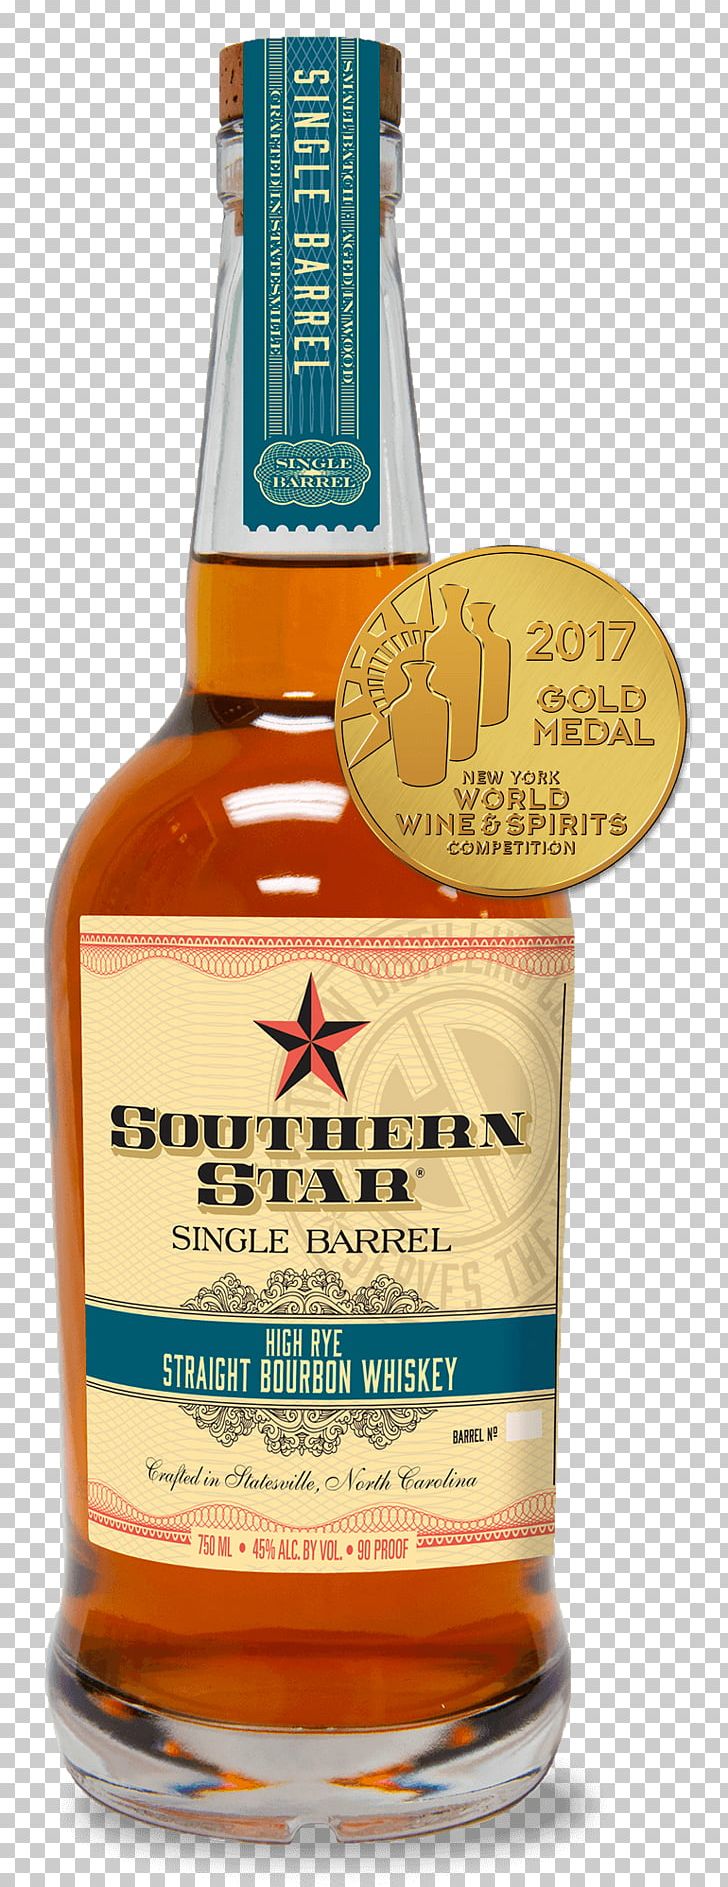 Bourbon Whiskey Distillation Distilled Beverage Southern Distilling Company PNG, Clipart, Alcoholic Beverage, Bottle, Bourbon, Bourbon Whiskey, Brandy Free PNG Download